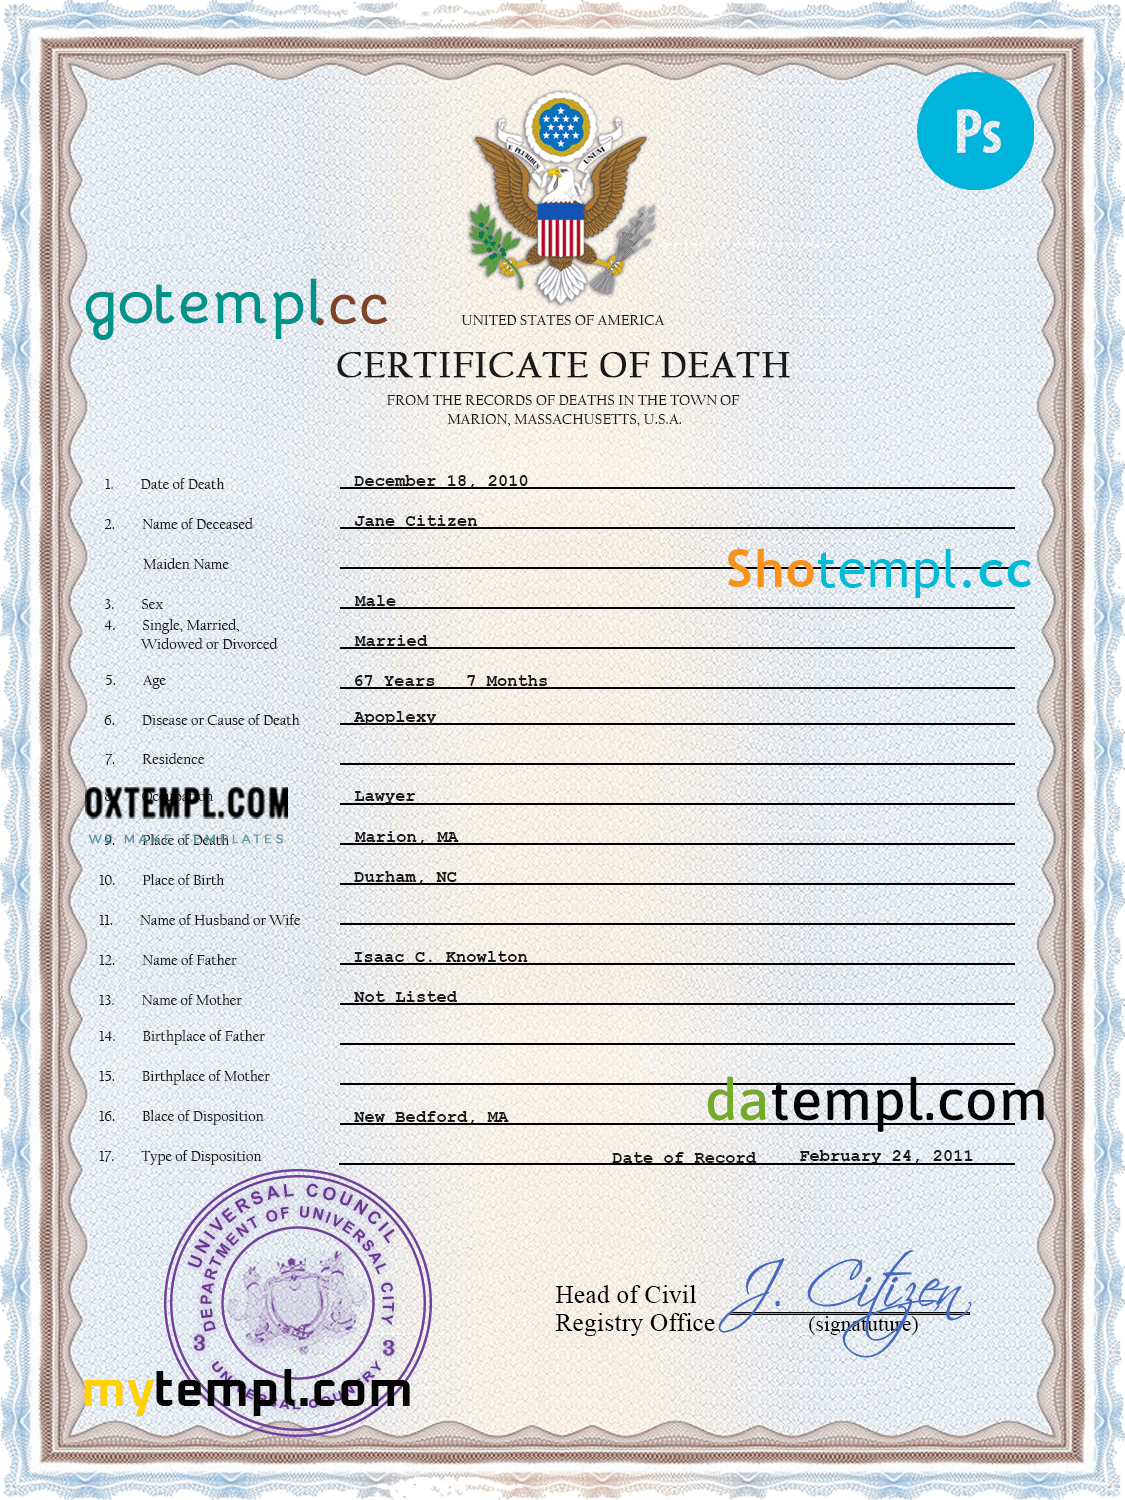 # affiliate death universal certificate PSD template, completely editable